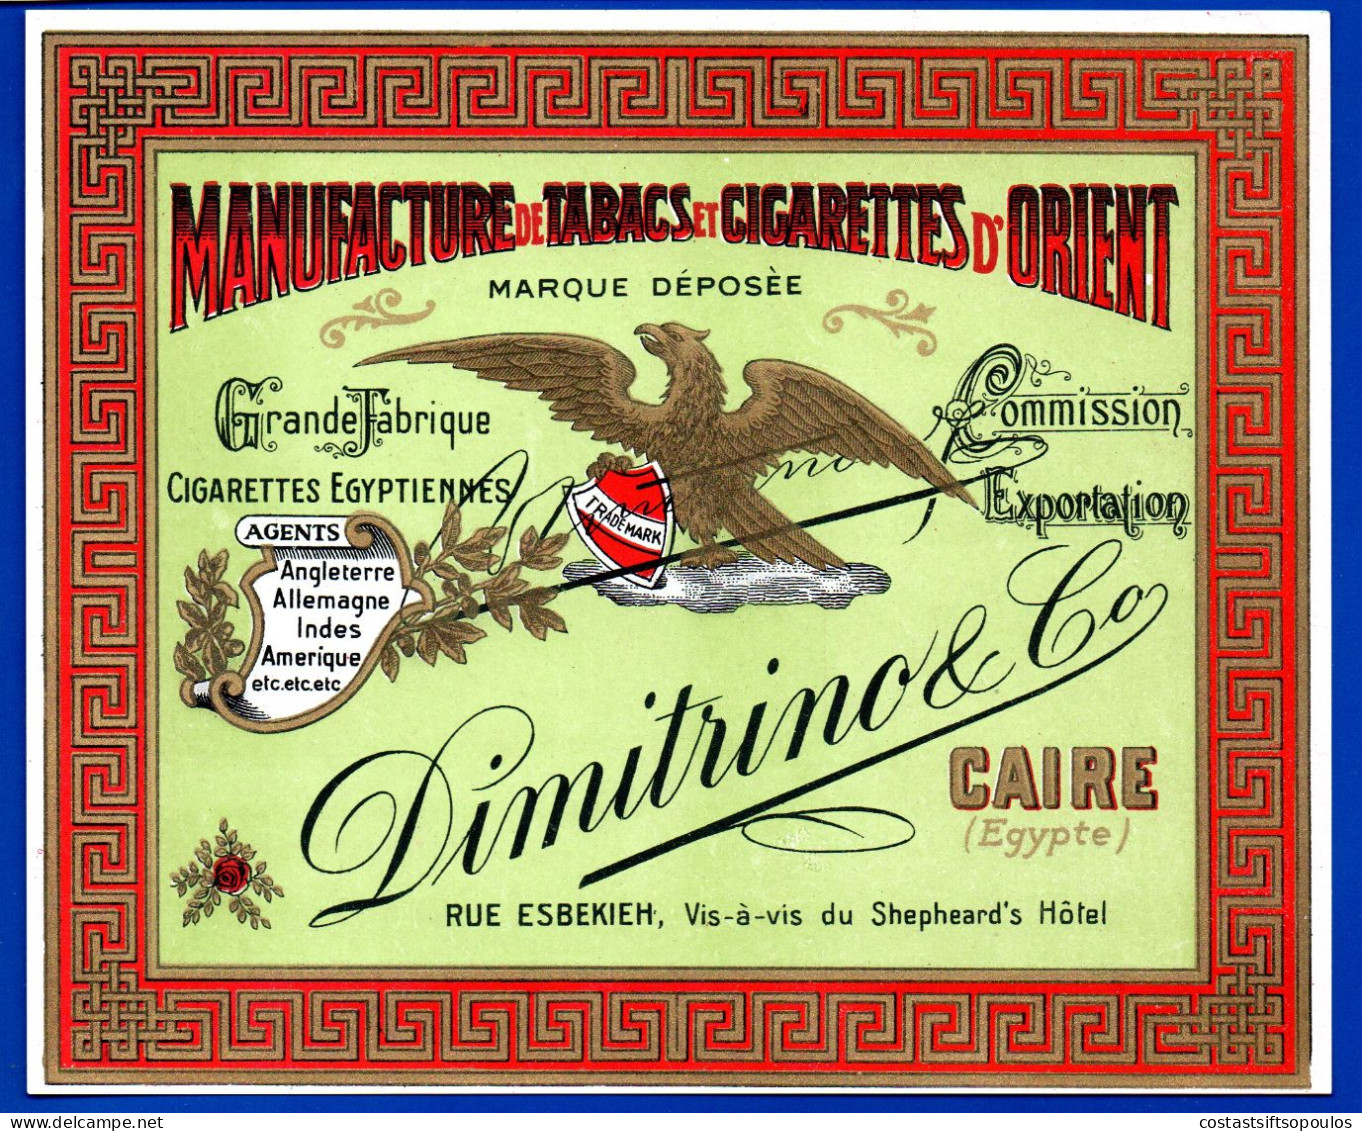 1812. EGYPT DIMITRINO CIGARETTES 2 EARLY 1900 LABELS 1st. 19 X 14 Cm. 2nd. 17 X 14 - Werbeartikel